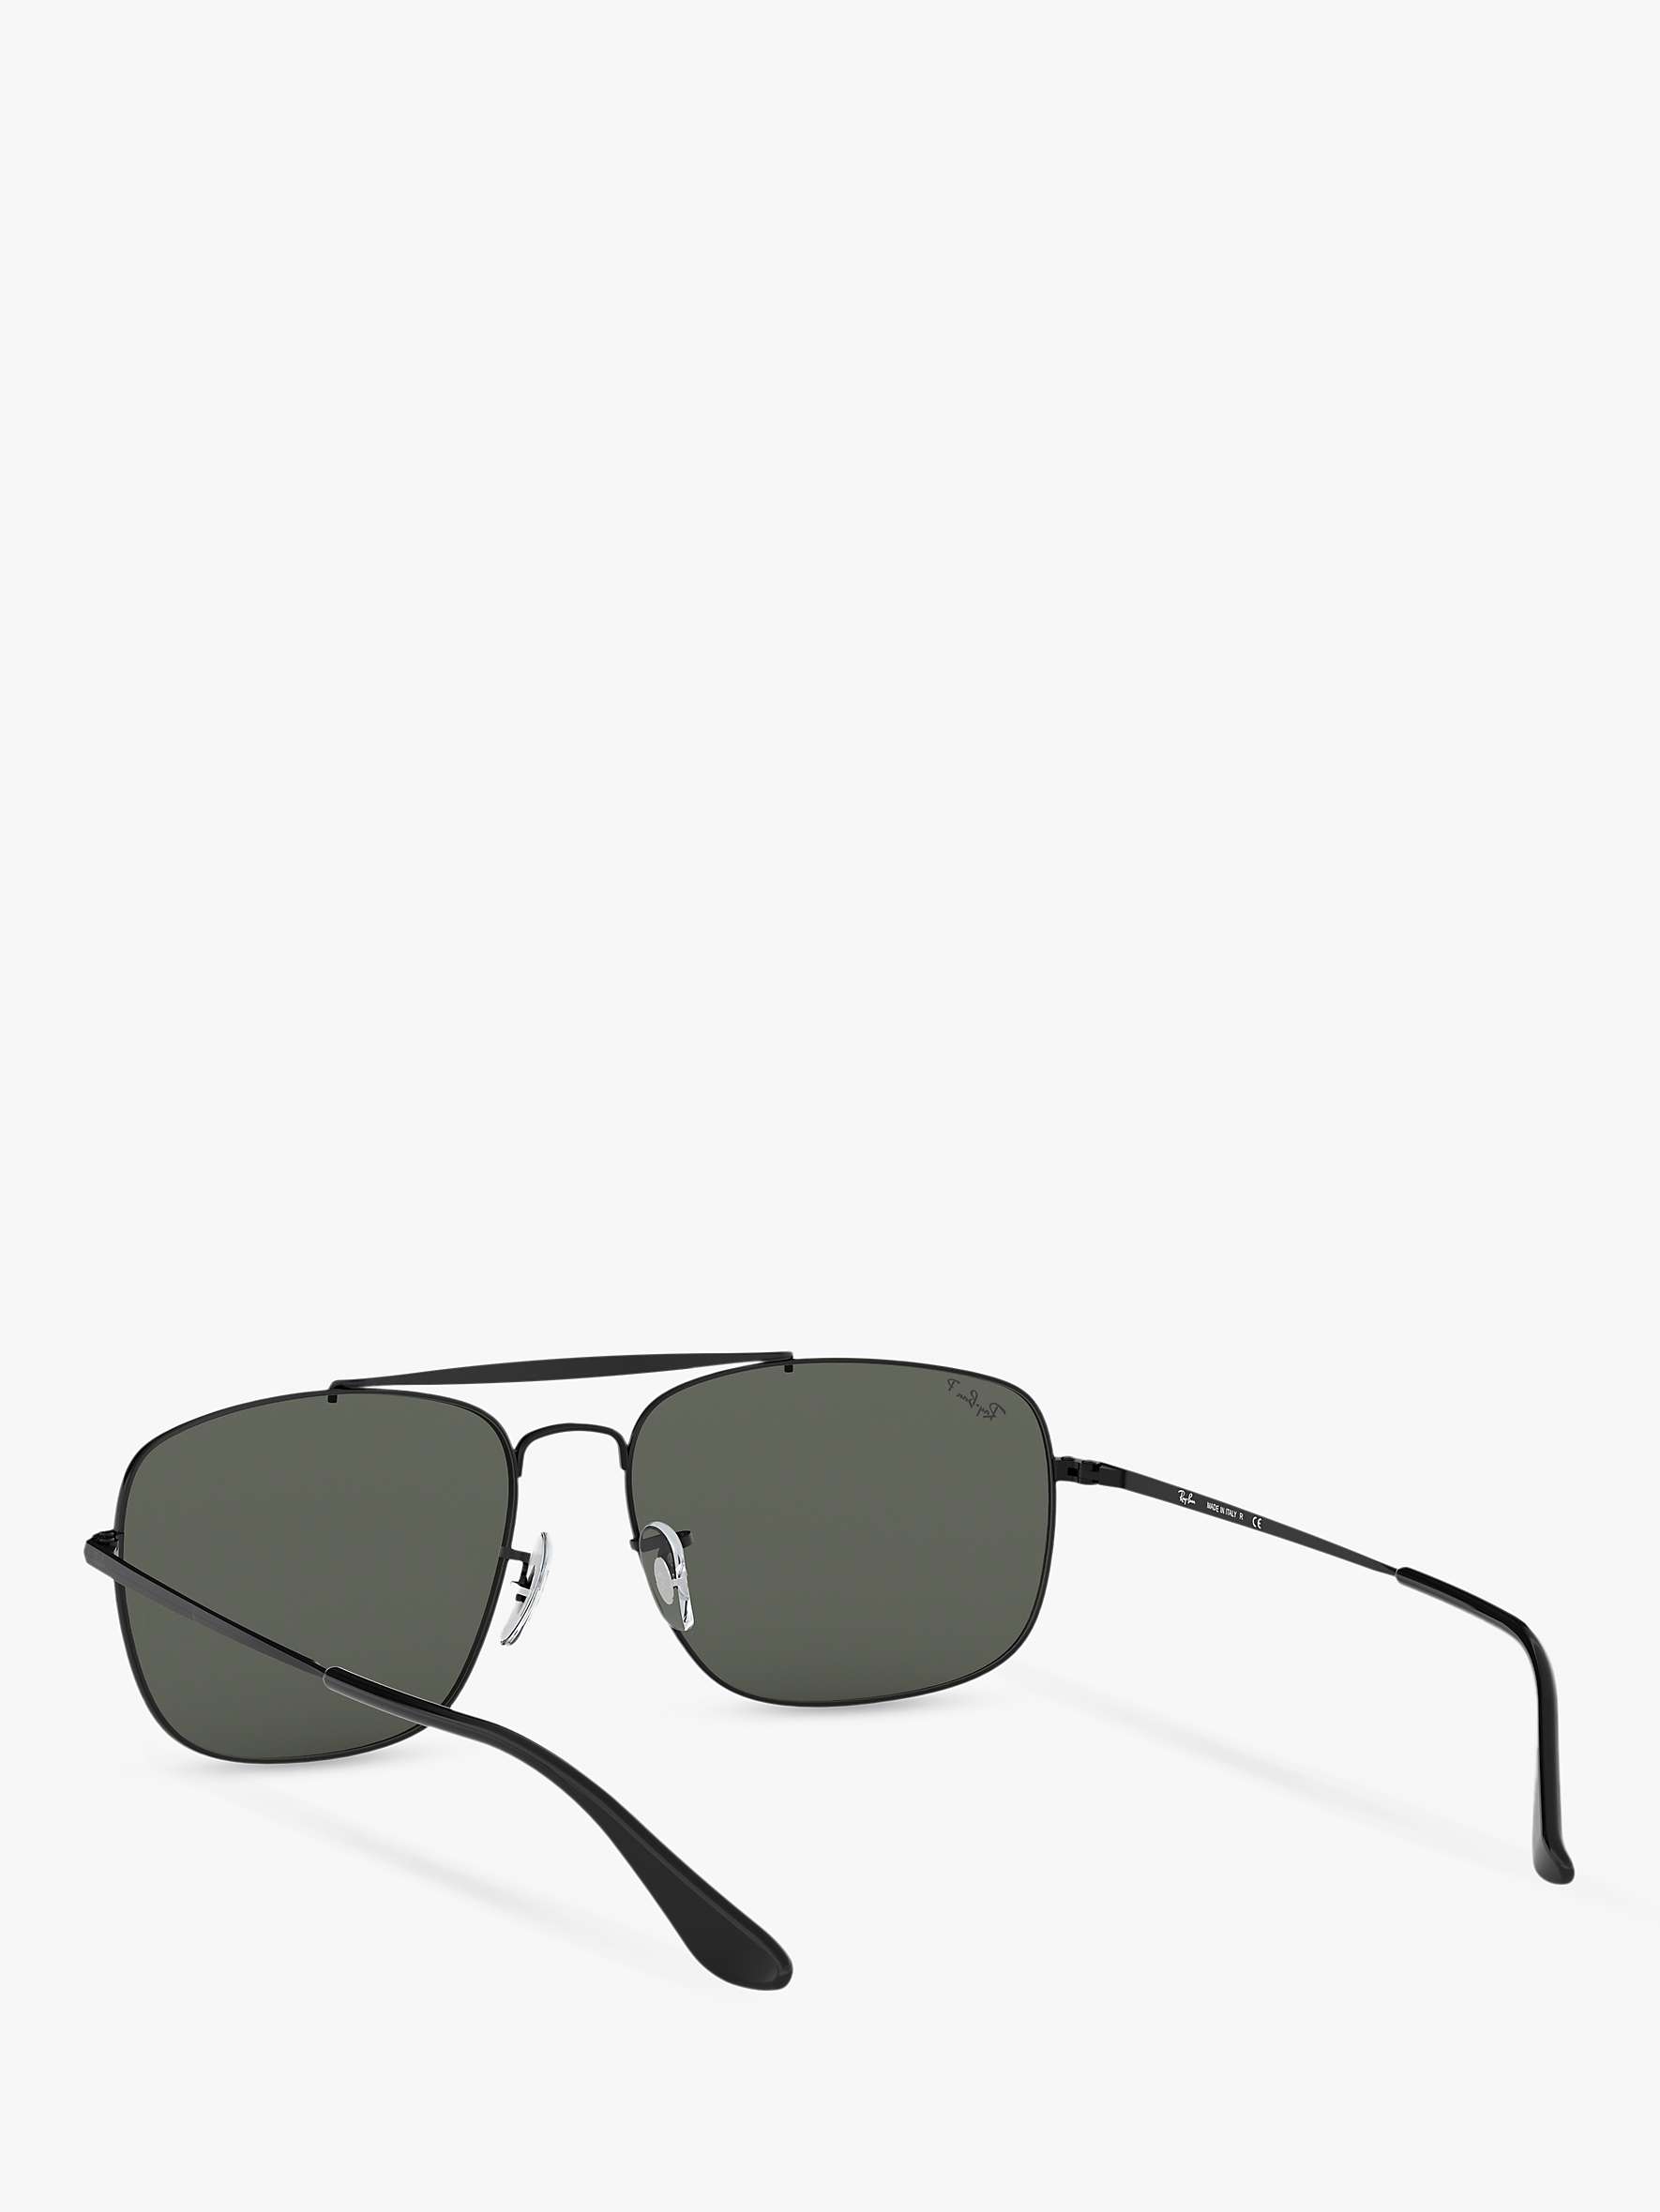 Buy Ray-Ban RB3560 Men's The Colonel Polarised Square Sunglasses, Black/Green Online at johnlewis.com